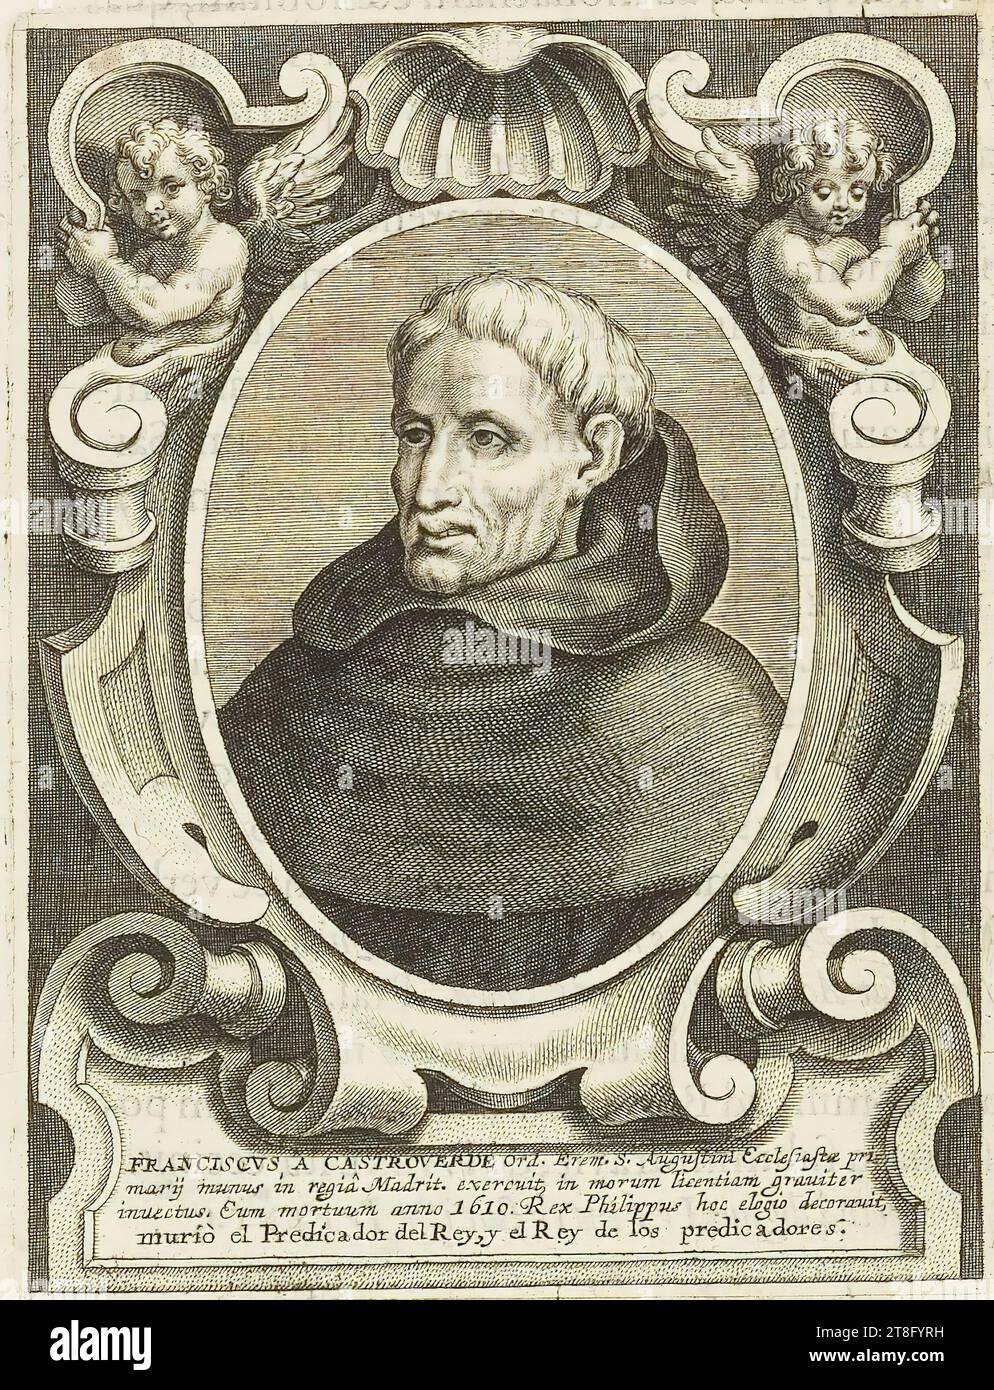 Probably designed by Jacques Franckaert II and engraved by Cornelius Galle. FRANCIS A CASTROVERDE Ord. I was S. Augustine Ecclesiastes pri, he exercised a great office in the kingdom of Madrid, and in the license of morals, he was severely indicted. Illustration from: C. de Corte, Men of illustrious men from the order of hermits..., 1636 Stock Photo